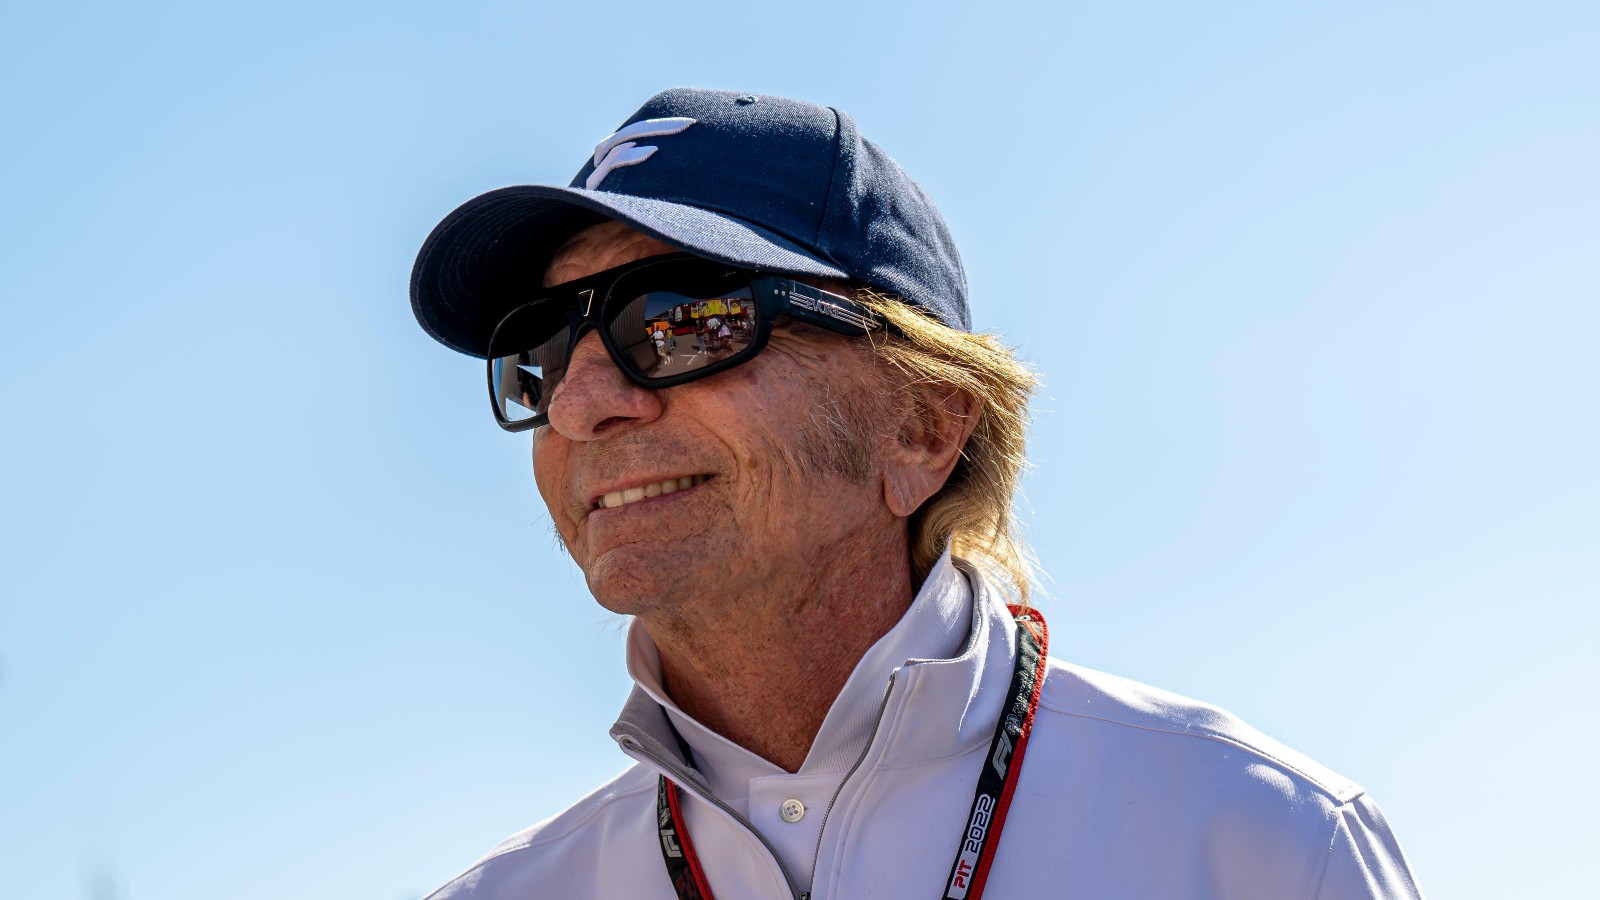 Emerson Fittipaldi in the paddock, wearing sunglasses. Italy, September 2022.